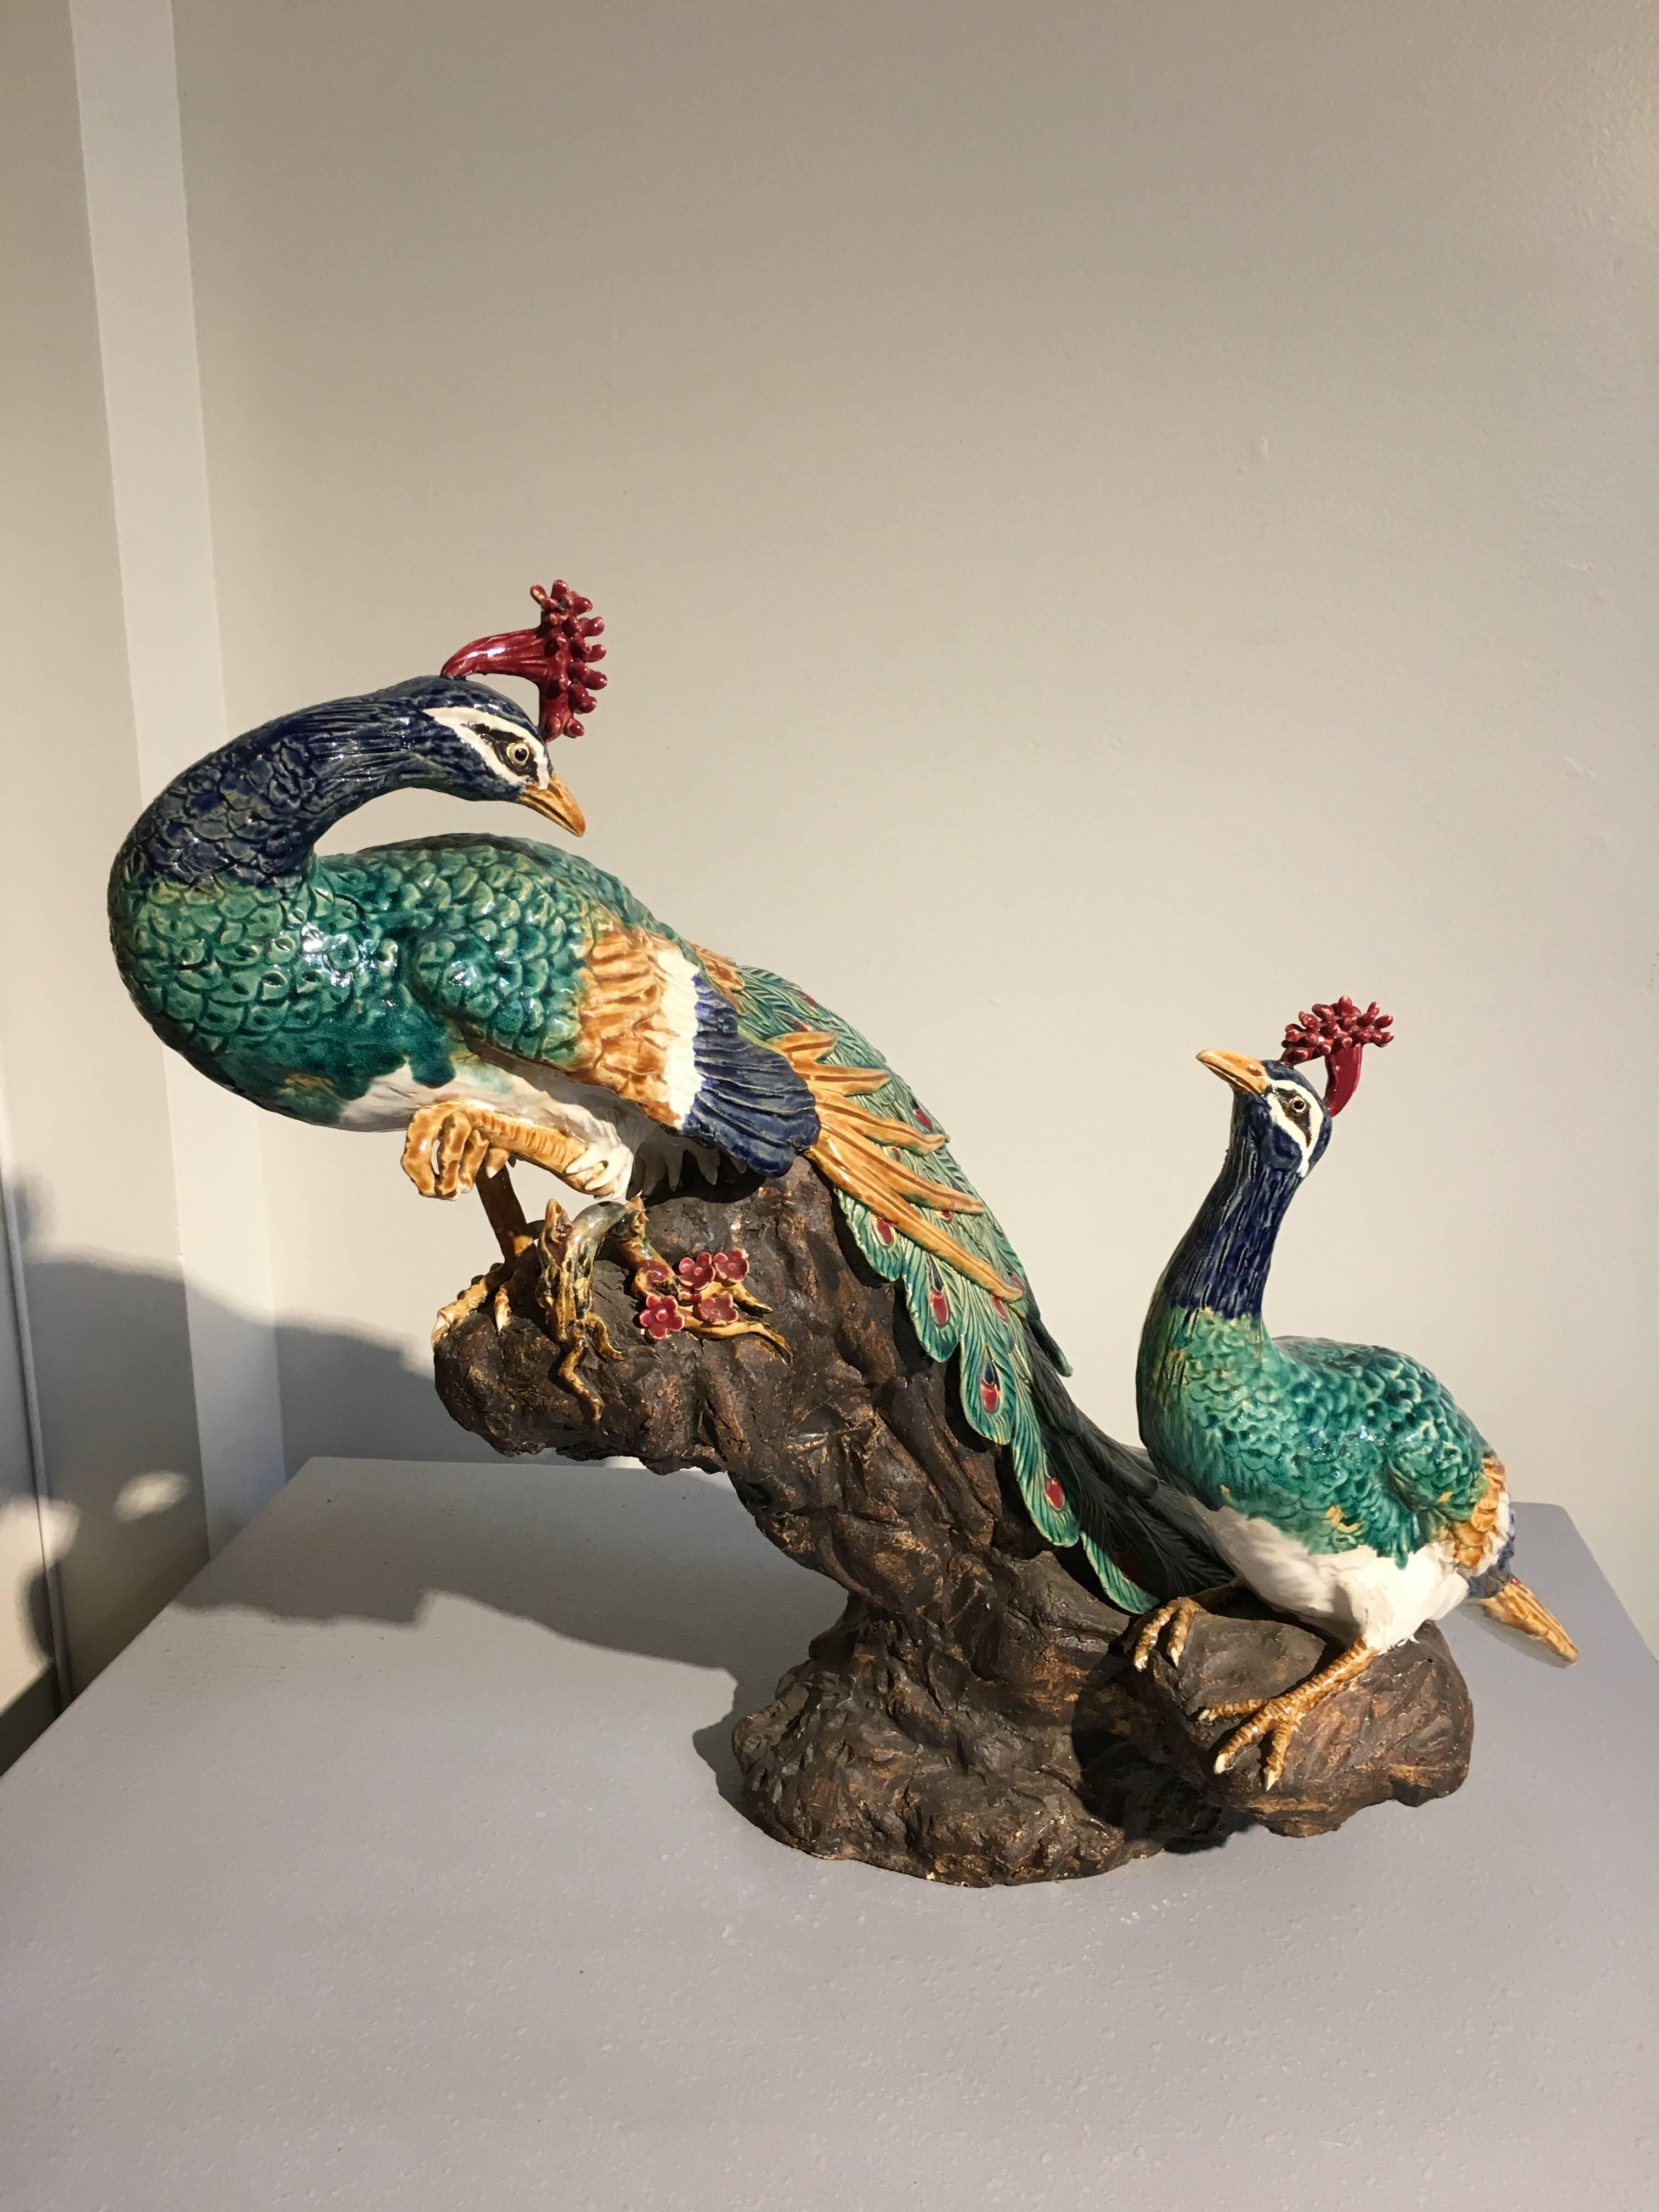 A large sculpture of a peacock and peahen perched on a rocky outcrop.
Well molded, and brilliantly glazed with green, blue, yellow, white and red. The peacock is perched on higher ground, his magnificent tail trailing out behind him, head turned to